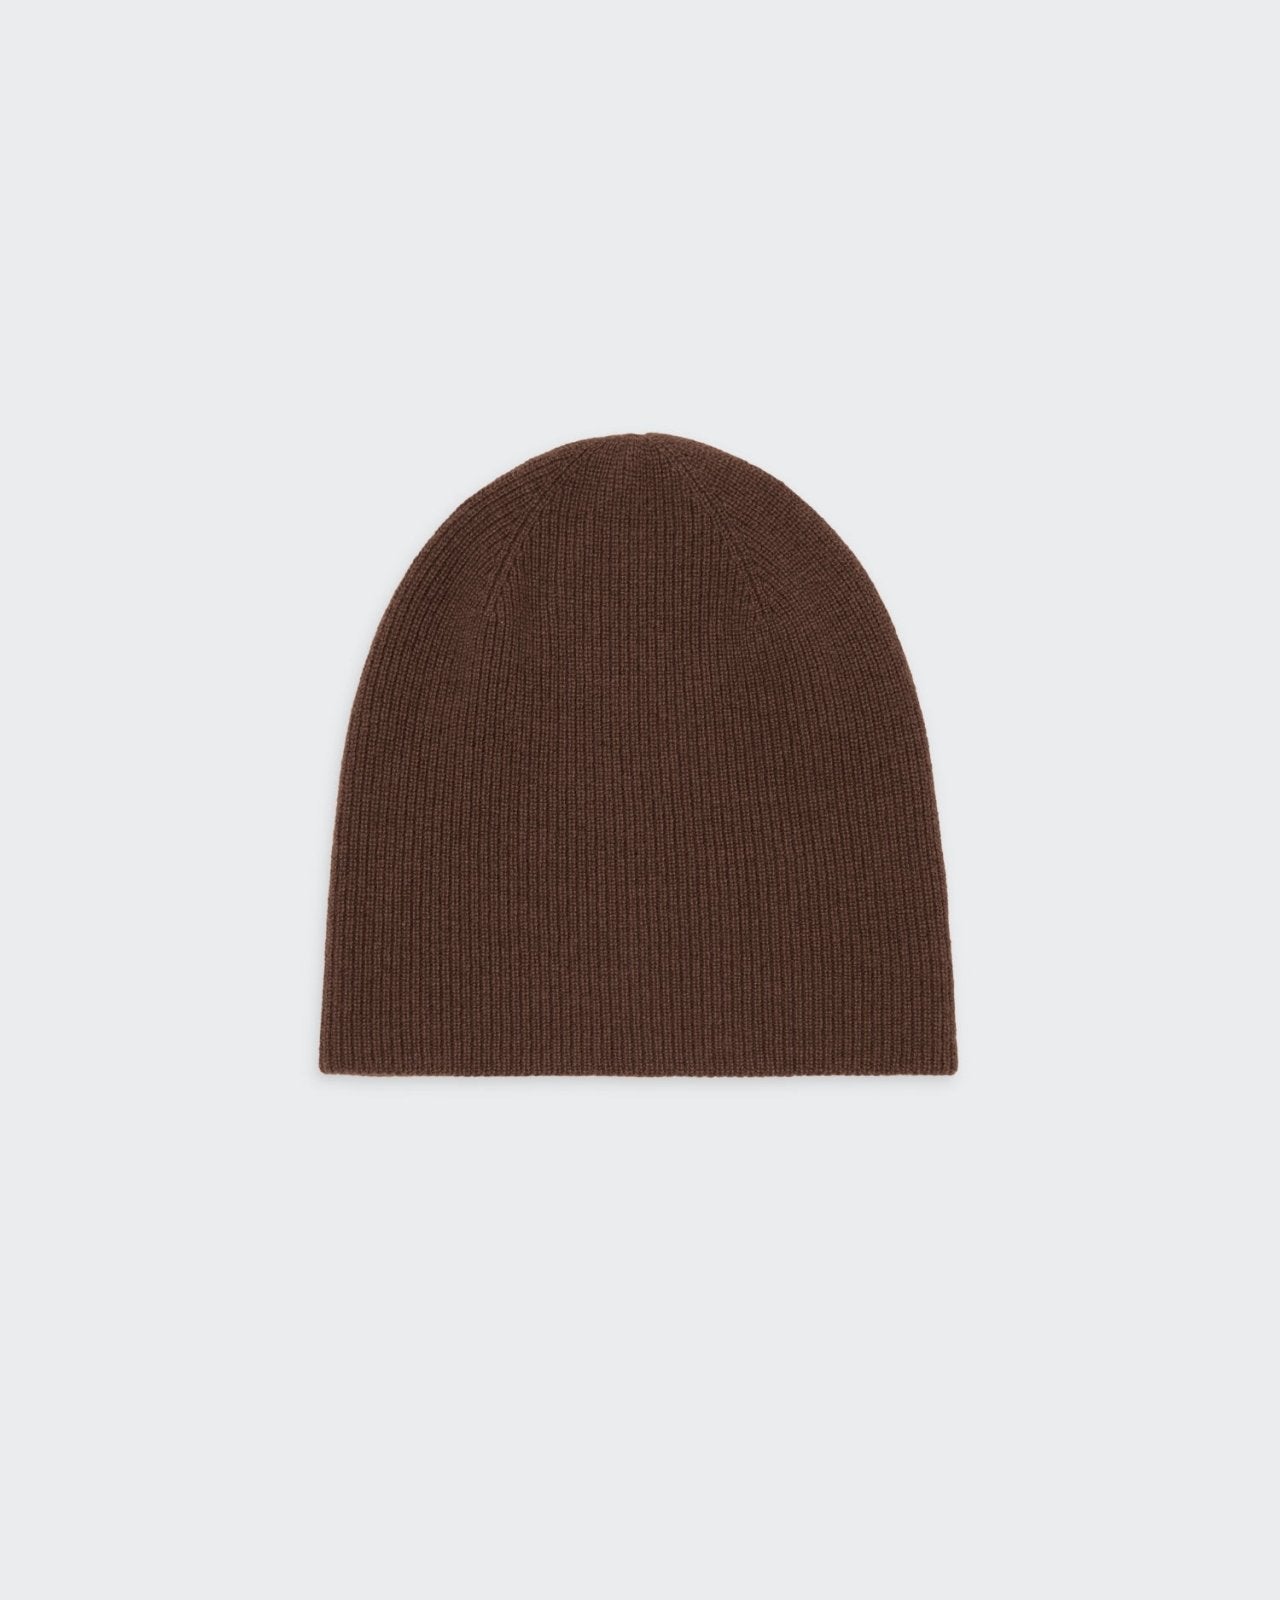 The Inside-Out! Hat - Blush/Walnut – Guest In Residence